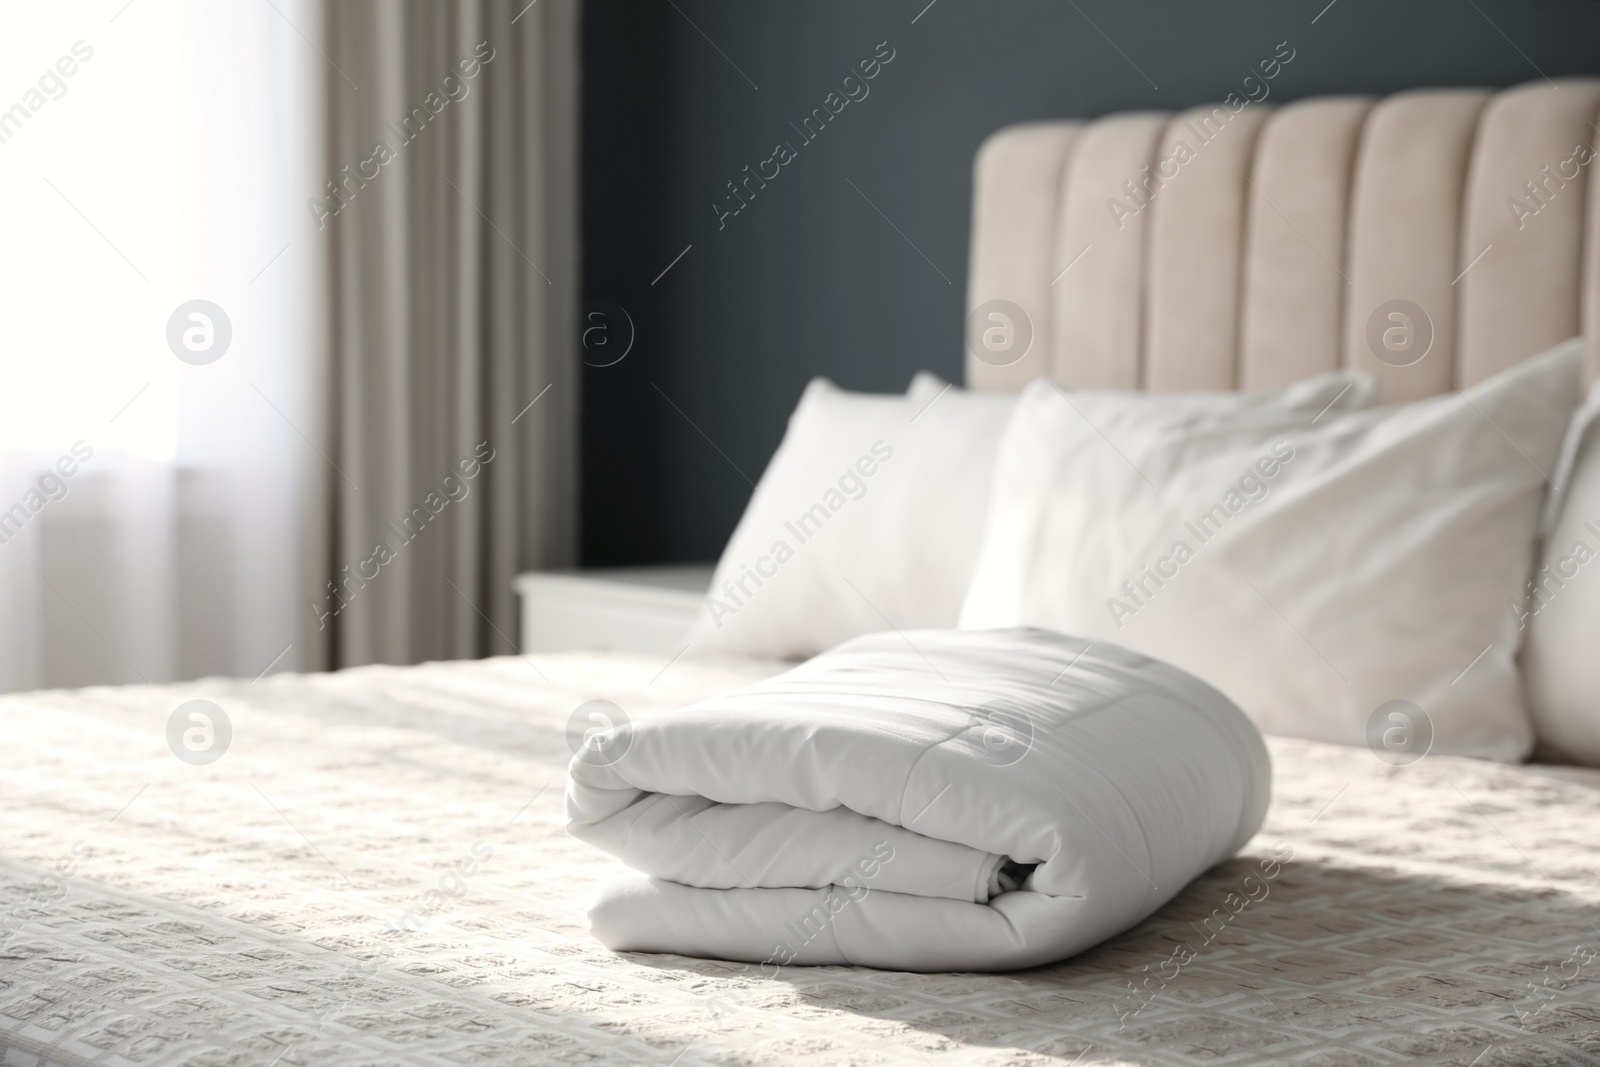 Photo of Folded clean blanket on bed in room